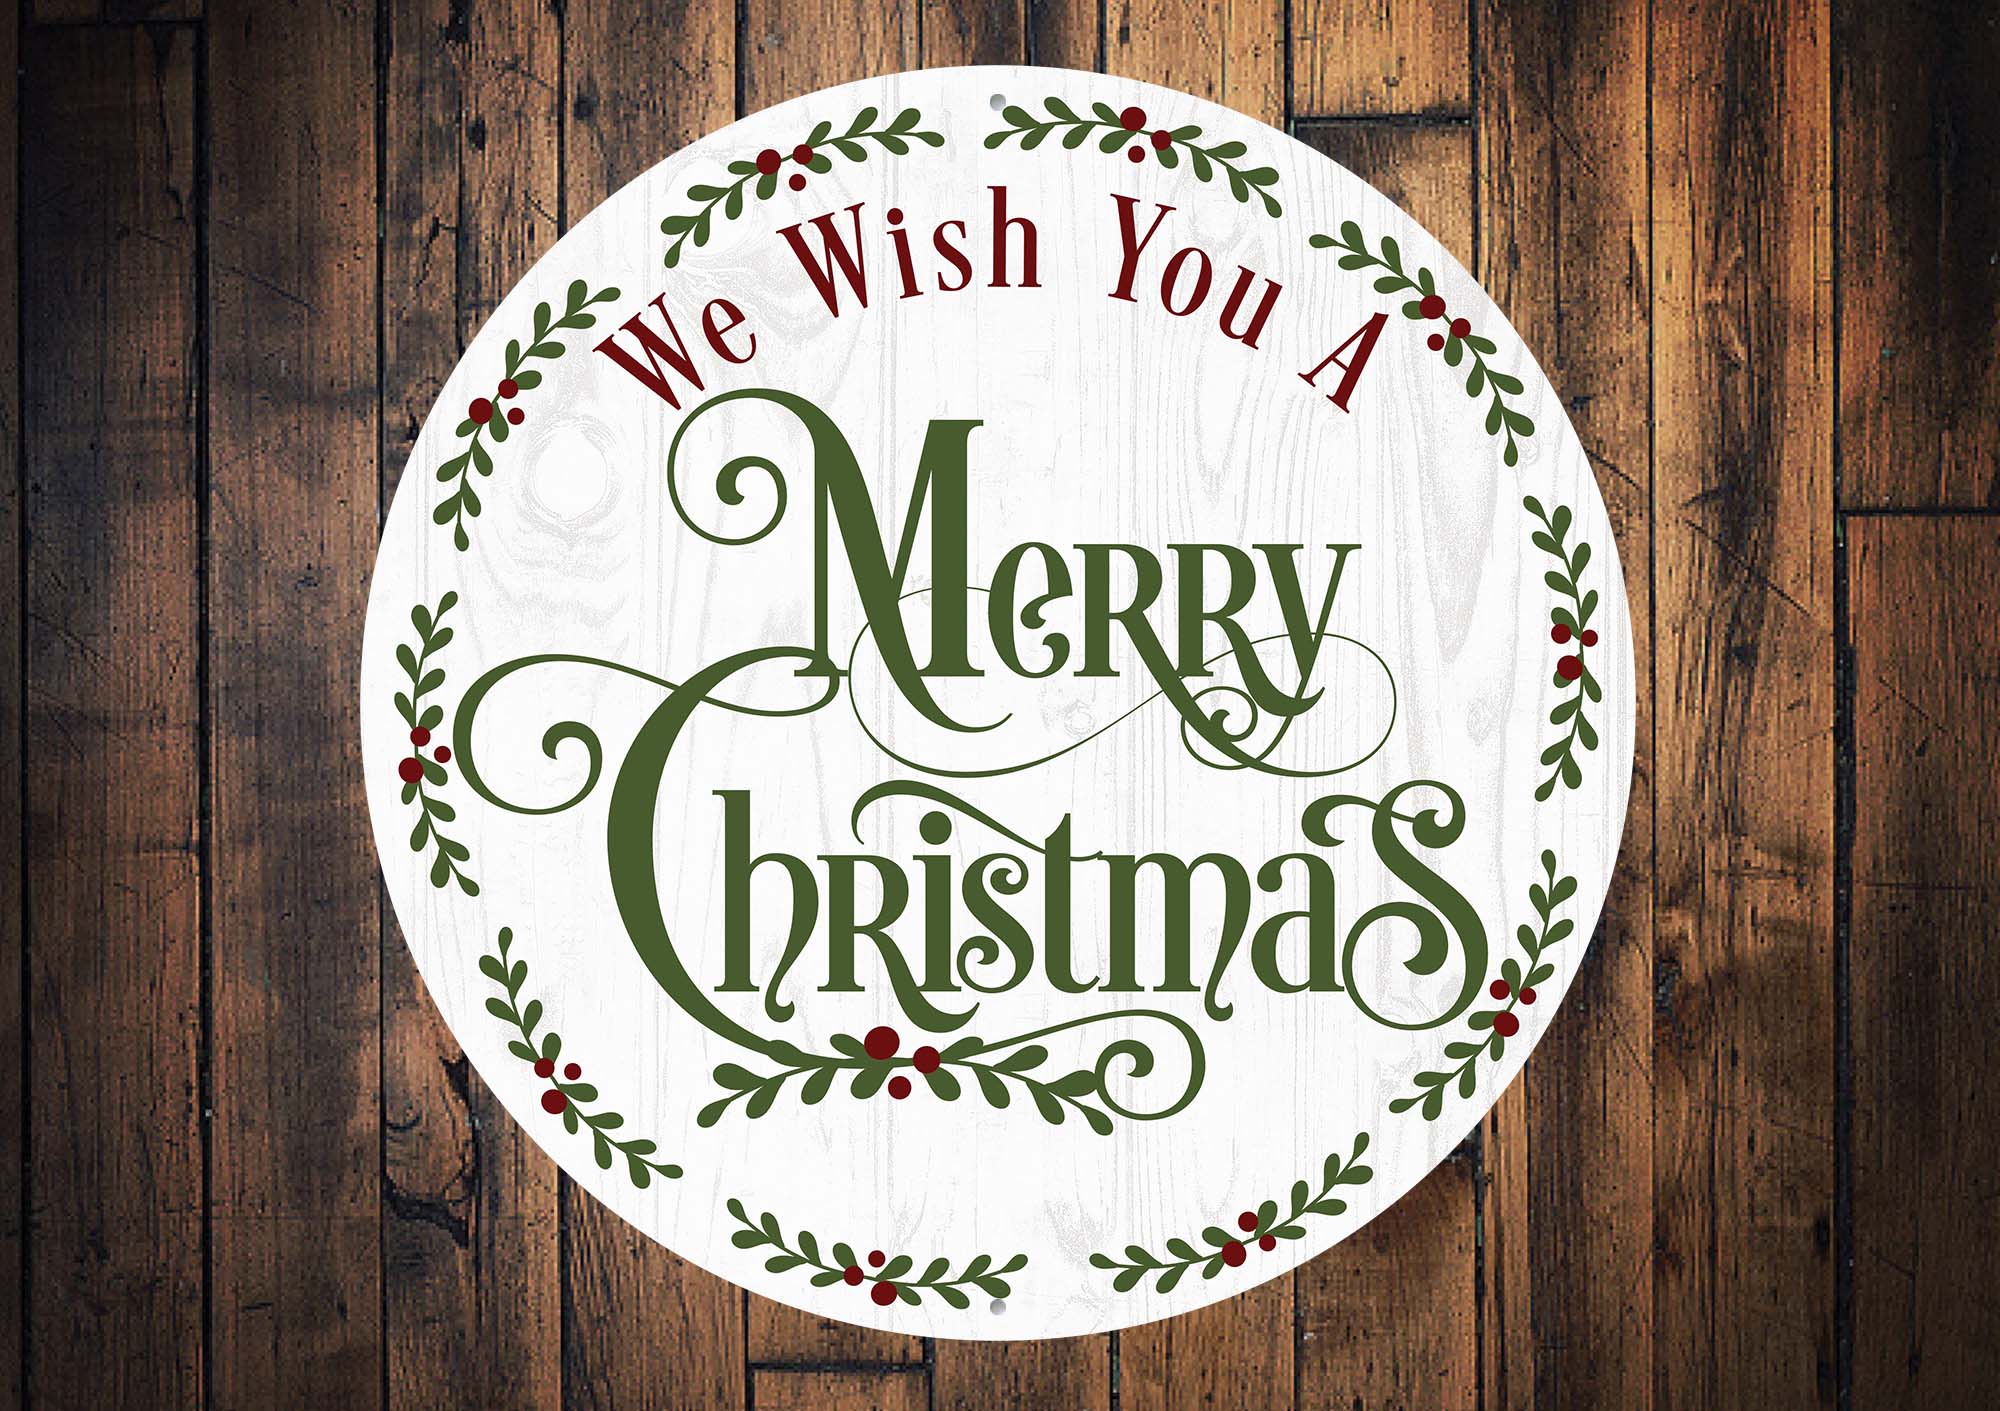 We Wish You A Merry Christmas Circle Sign